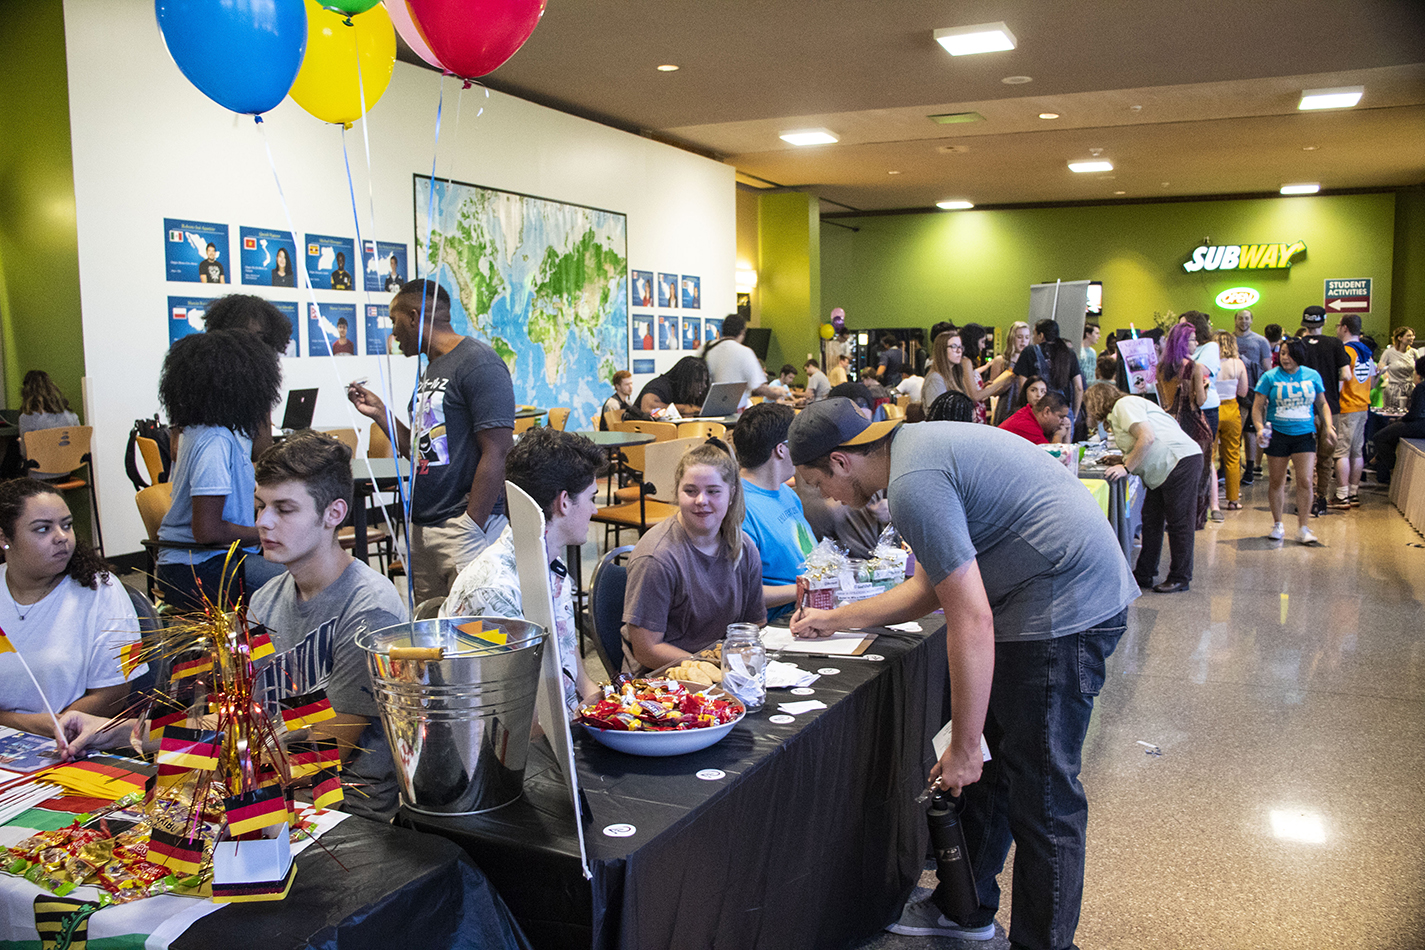 NE Campus’ Club Rush was one of three events across the district where students could learn about campus organizations and departments during the second week of classes.